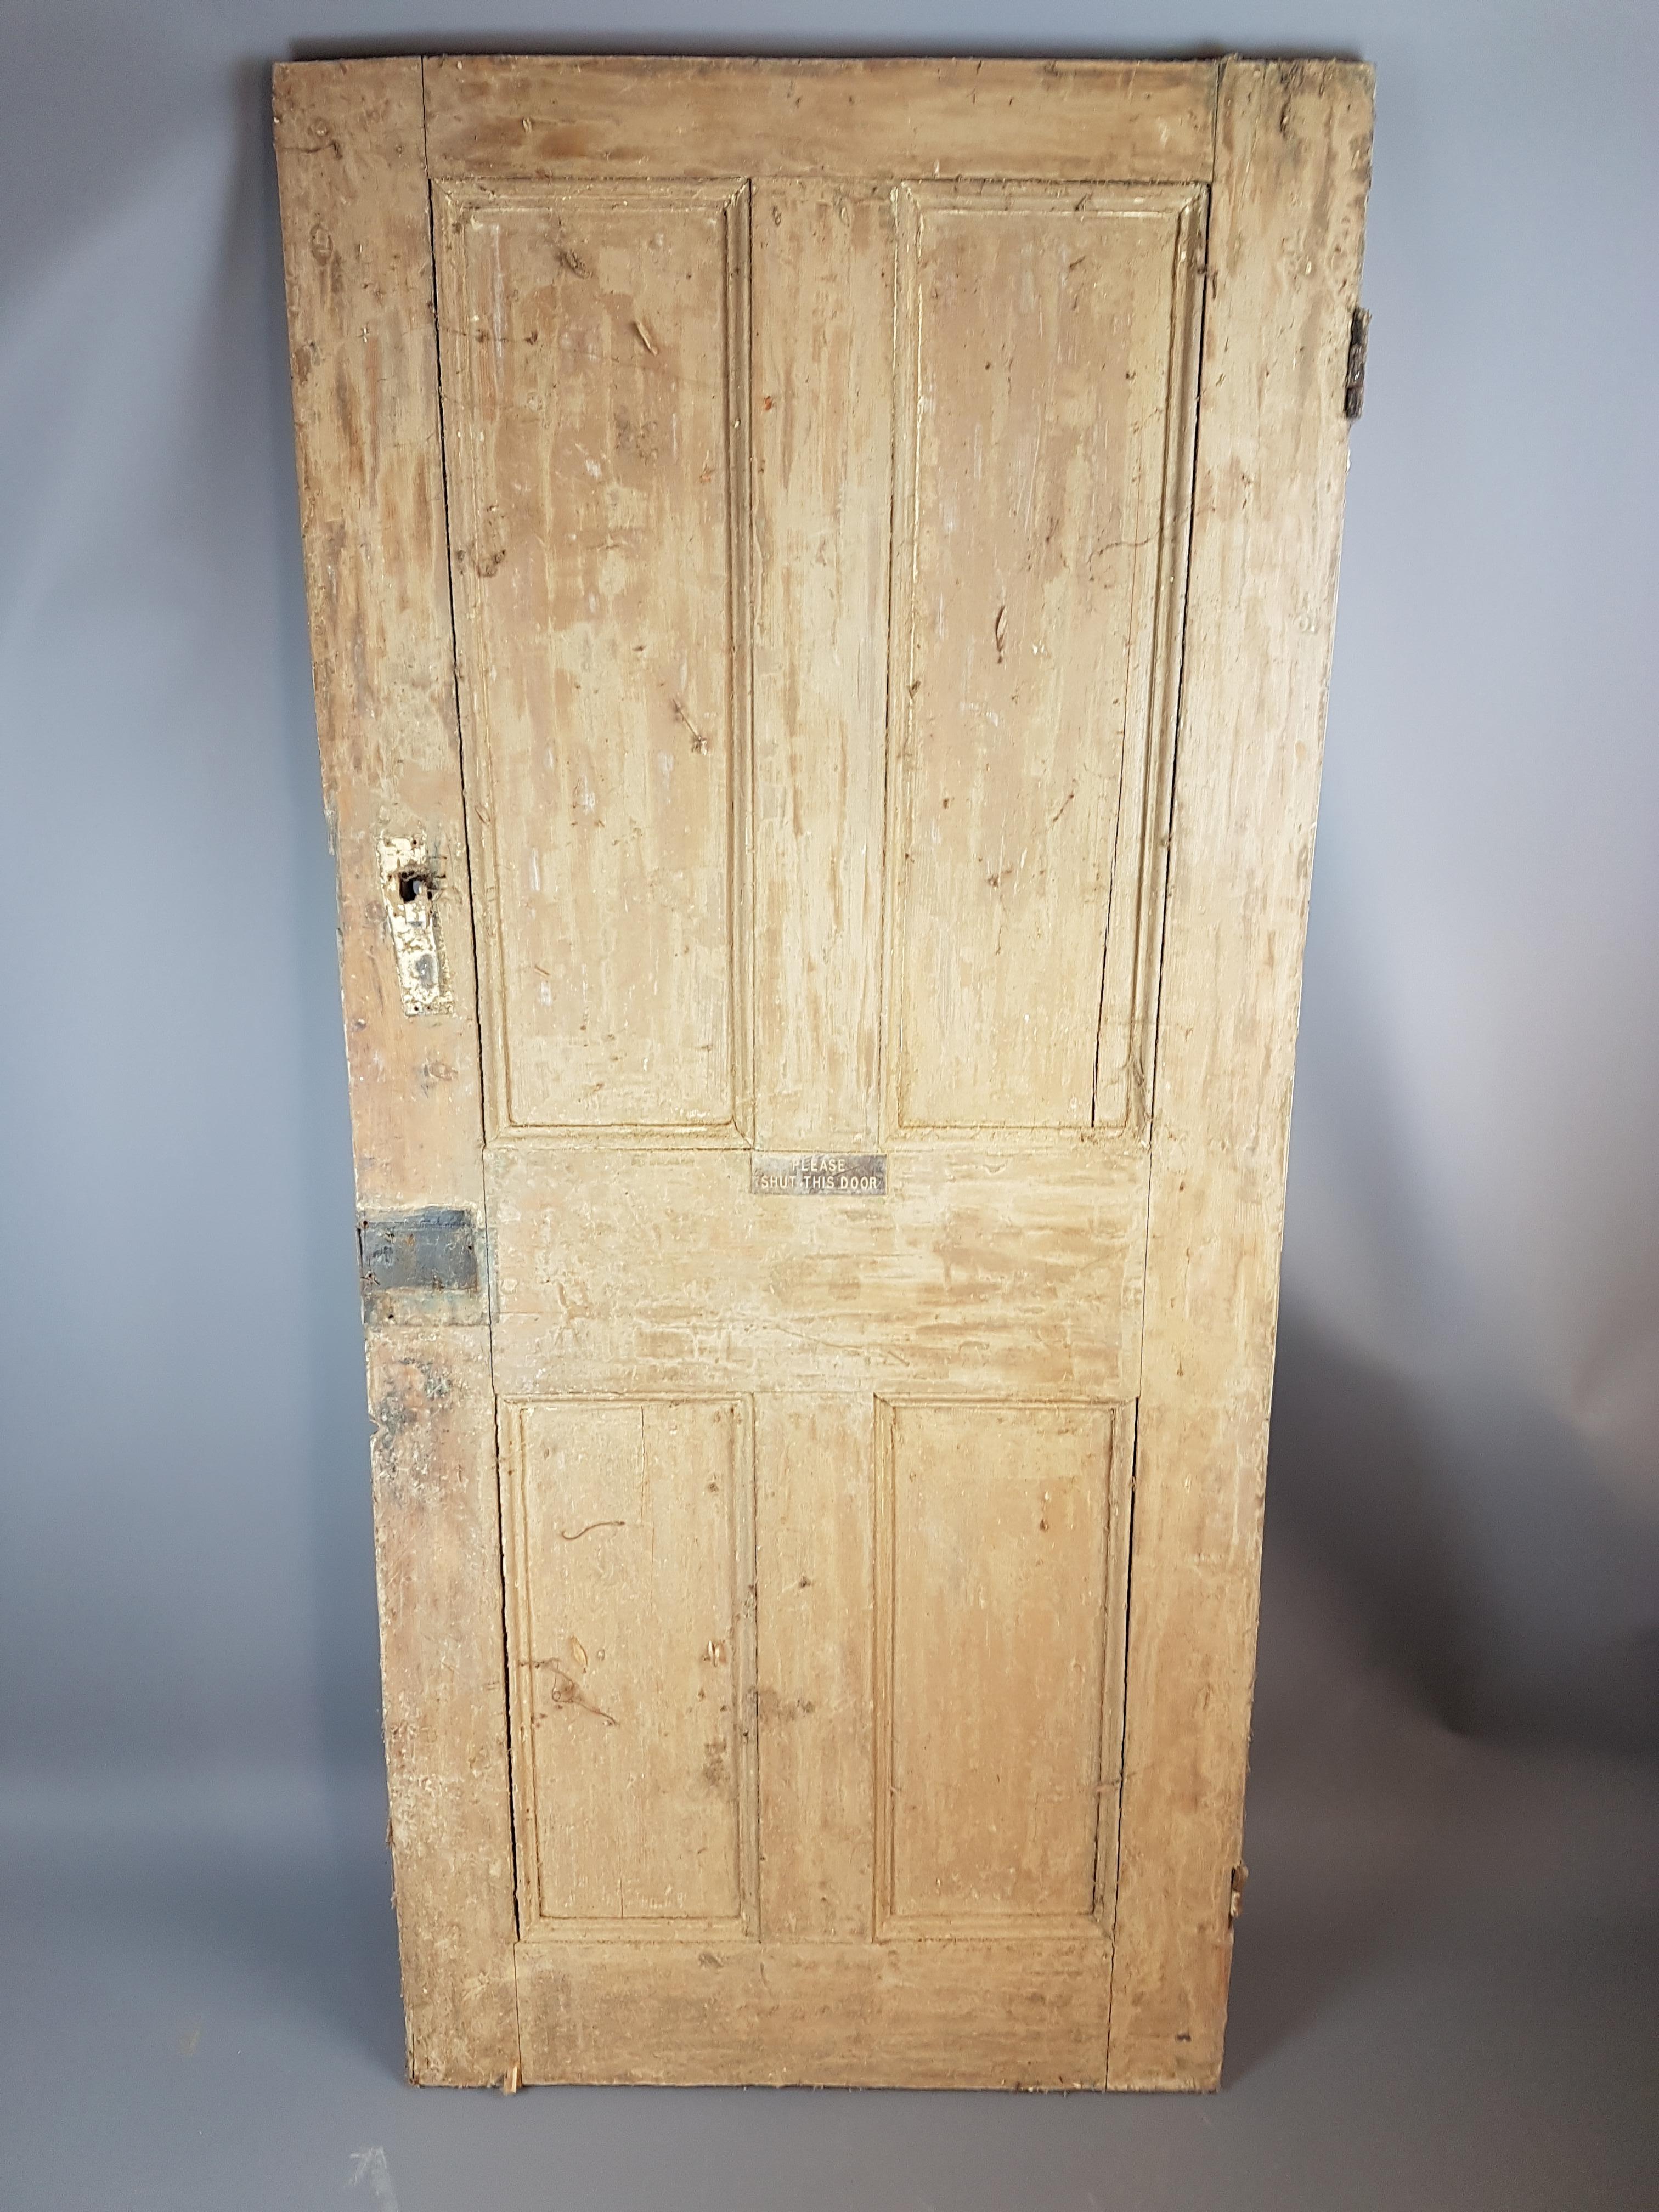 19th Century Painted Graffiti Art Door In Distressed Condition In Bodicote, Oxfordshire